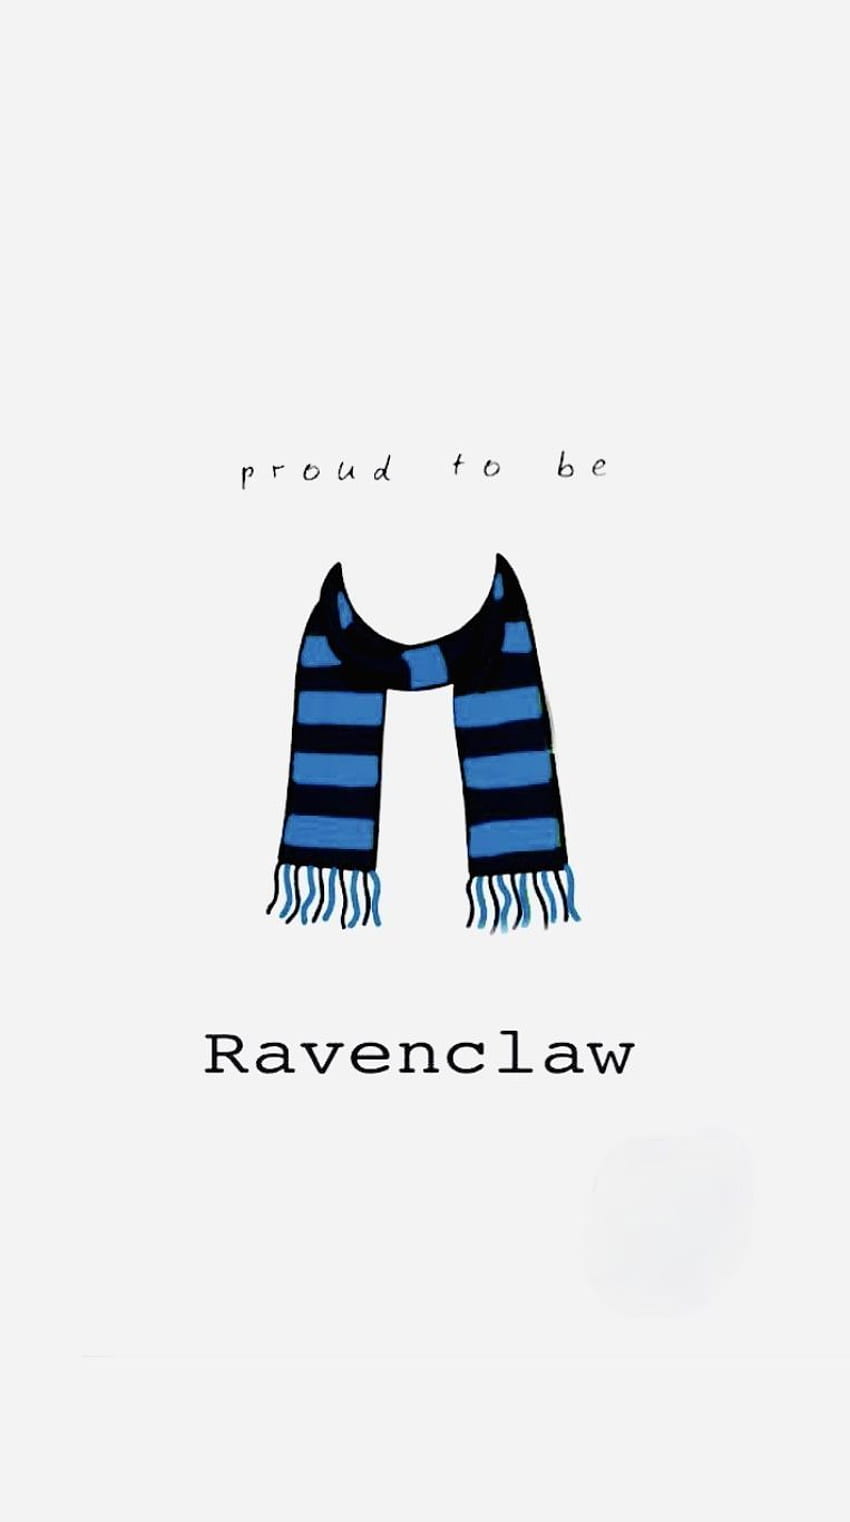 Ravenclaw Wallpaper  Top 30 Free Ravenclaw Backgrounds for iPhone  Harry  potter wallpaper Harry potter ravenclaw Harry potter drawings